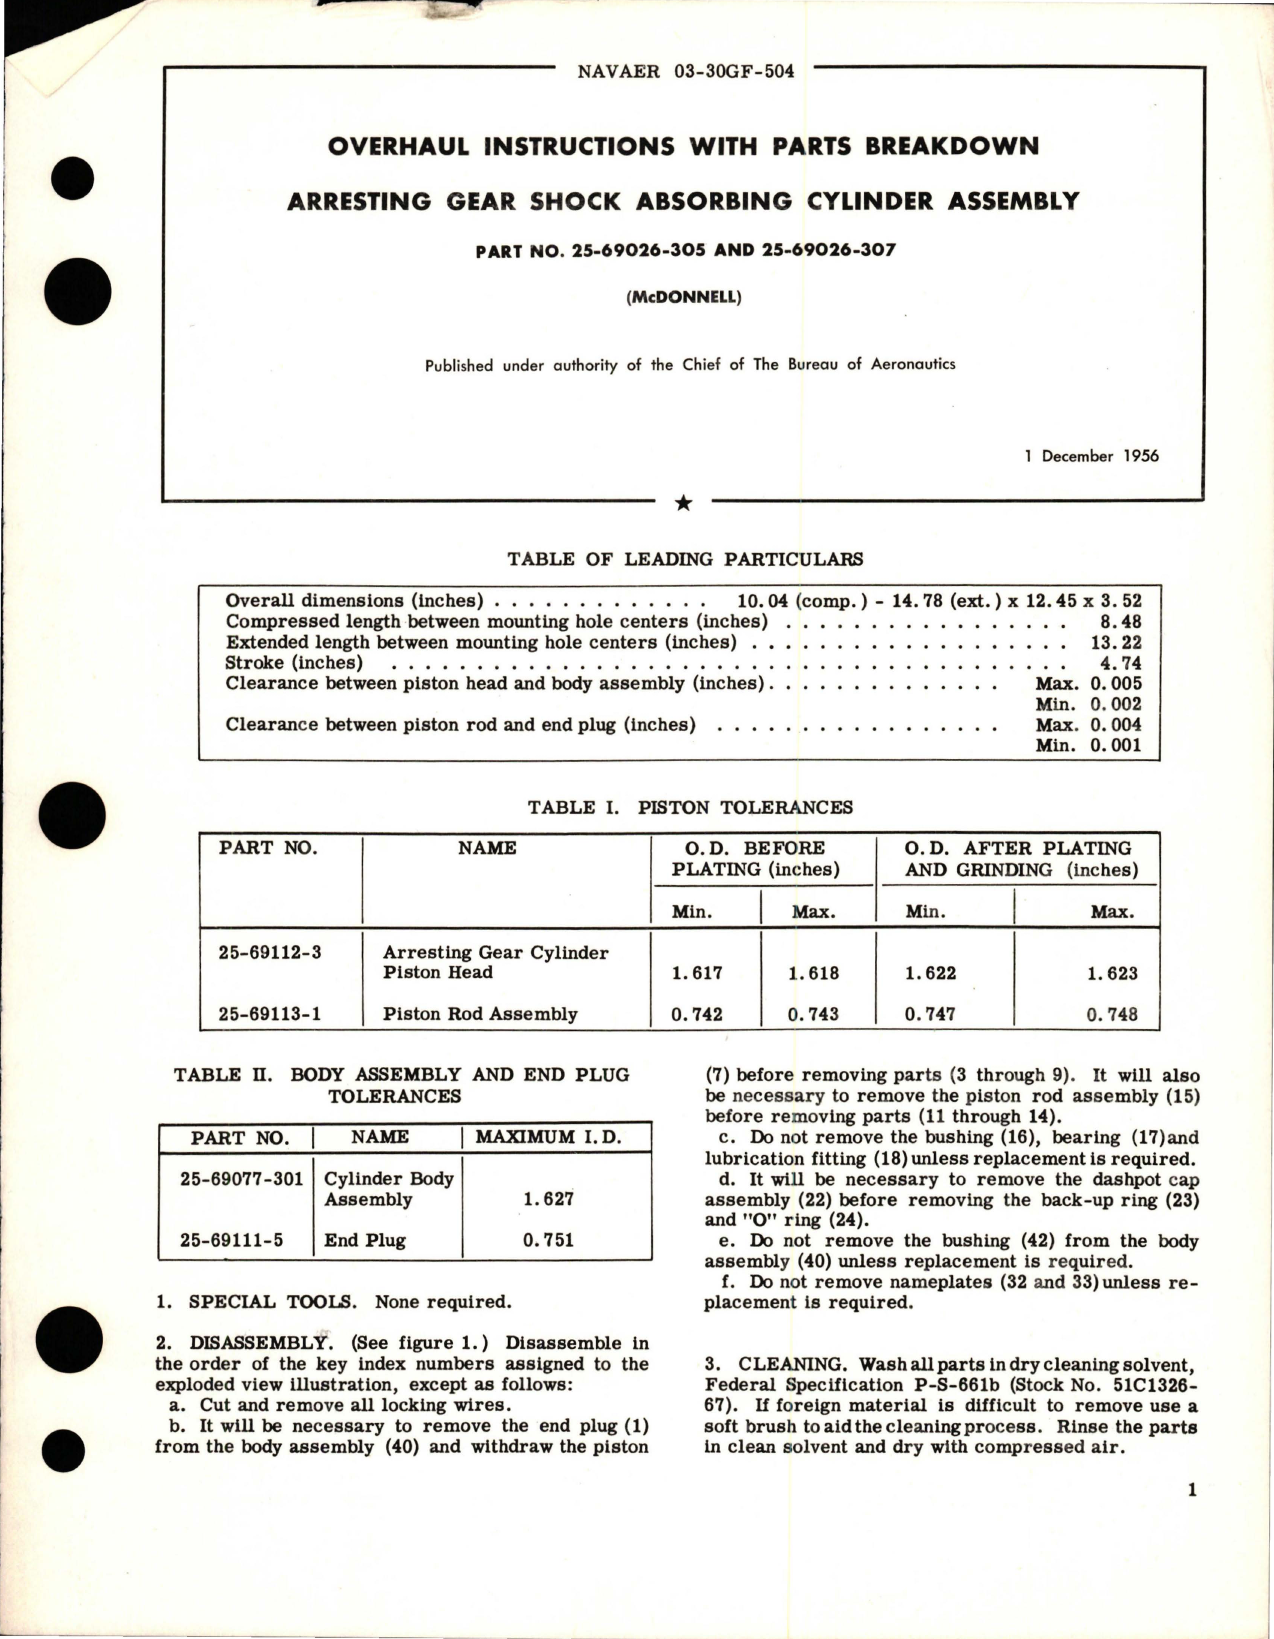 Sample page 1 from AirCorps Library document: Overhaul Instructions with Parts Breakdown for Arresting Gear Shock Absorbing Cylinder Assembly - Parts 25-69026-305 and 25-69026-307